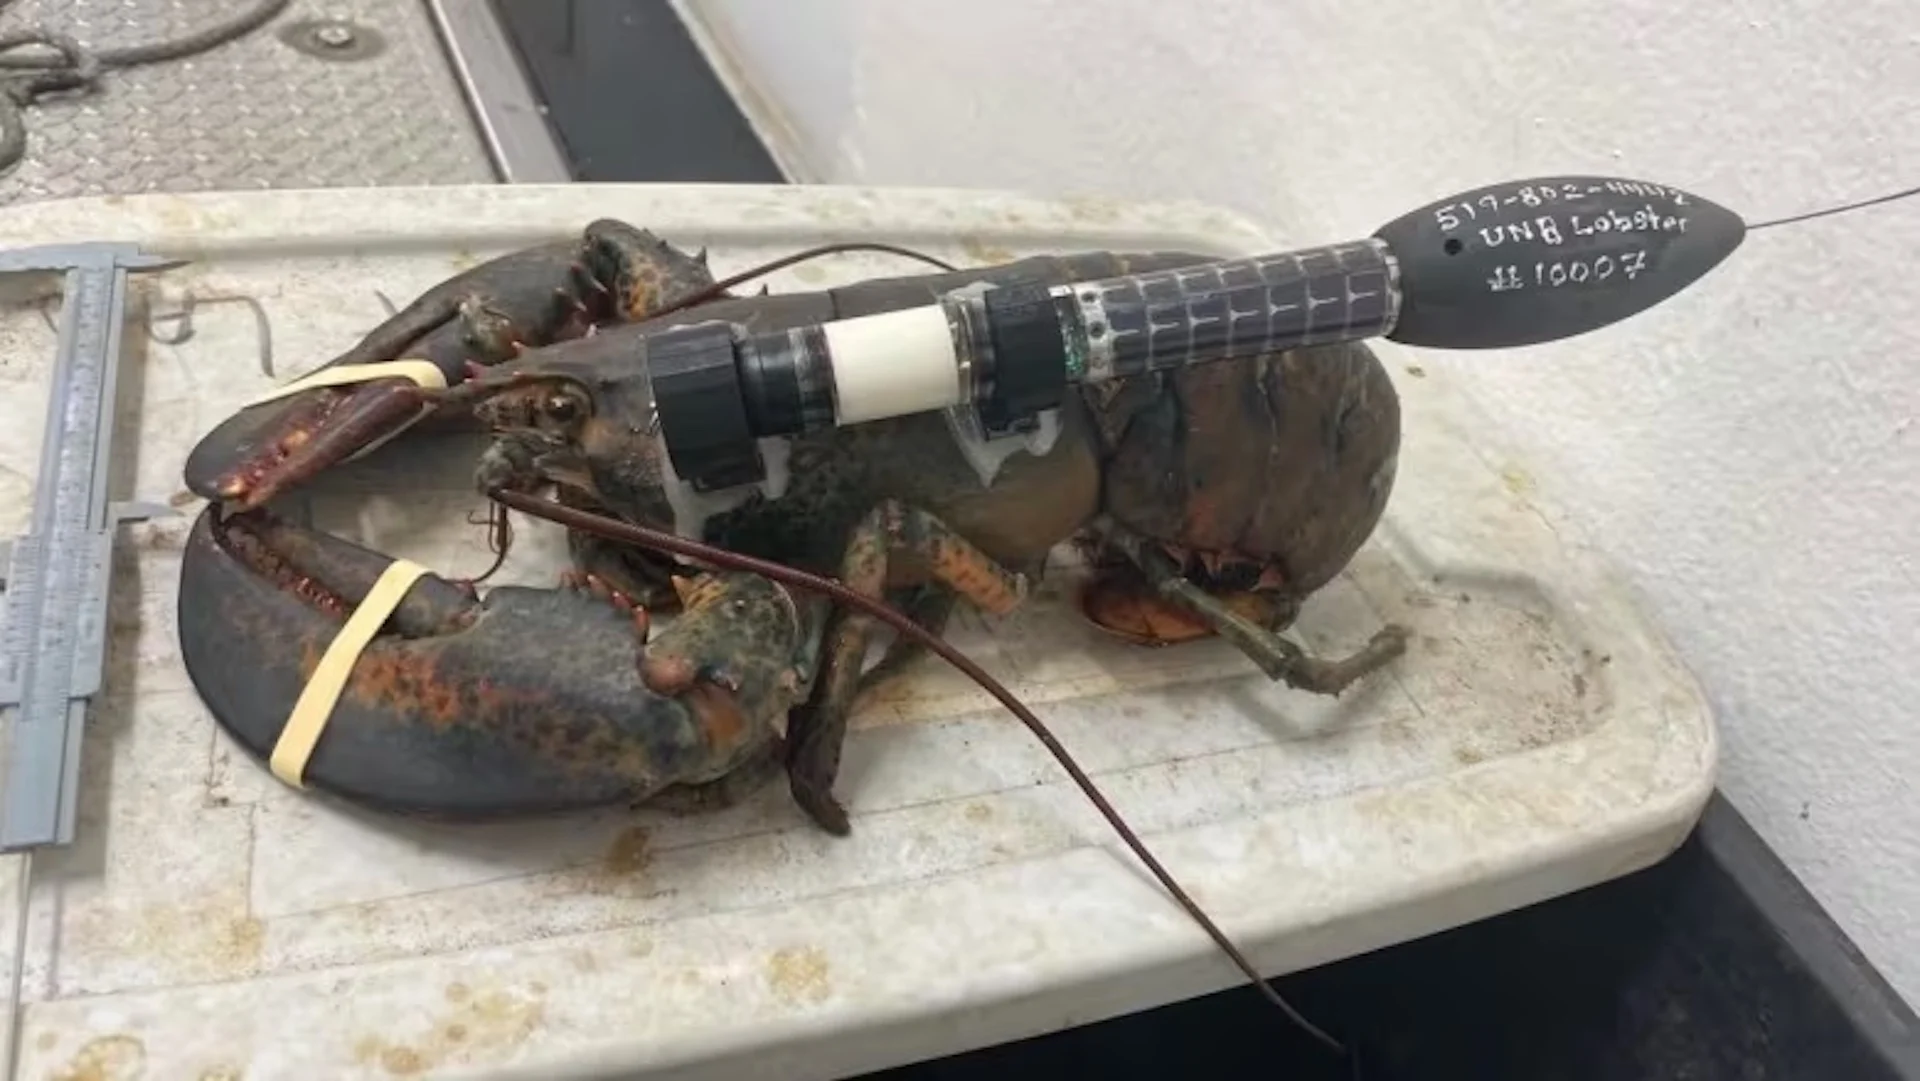 Is that a rocket on that lobster? No, it's just a satellite tracker